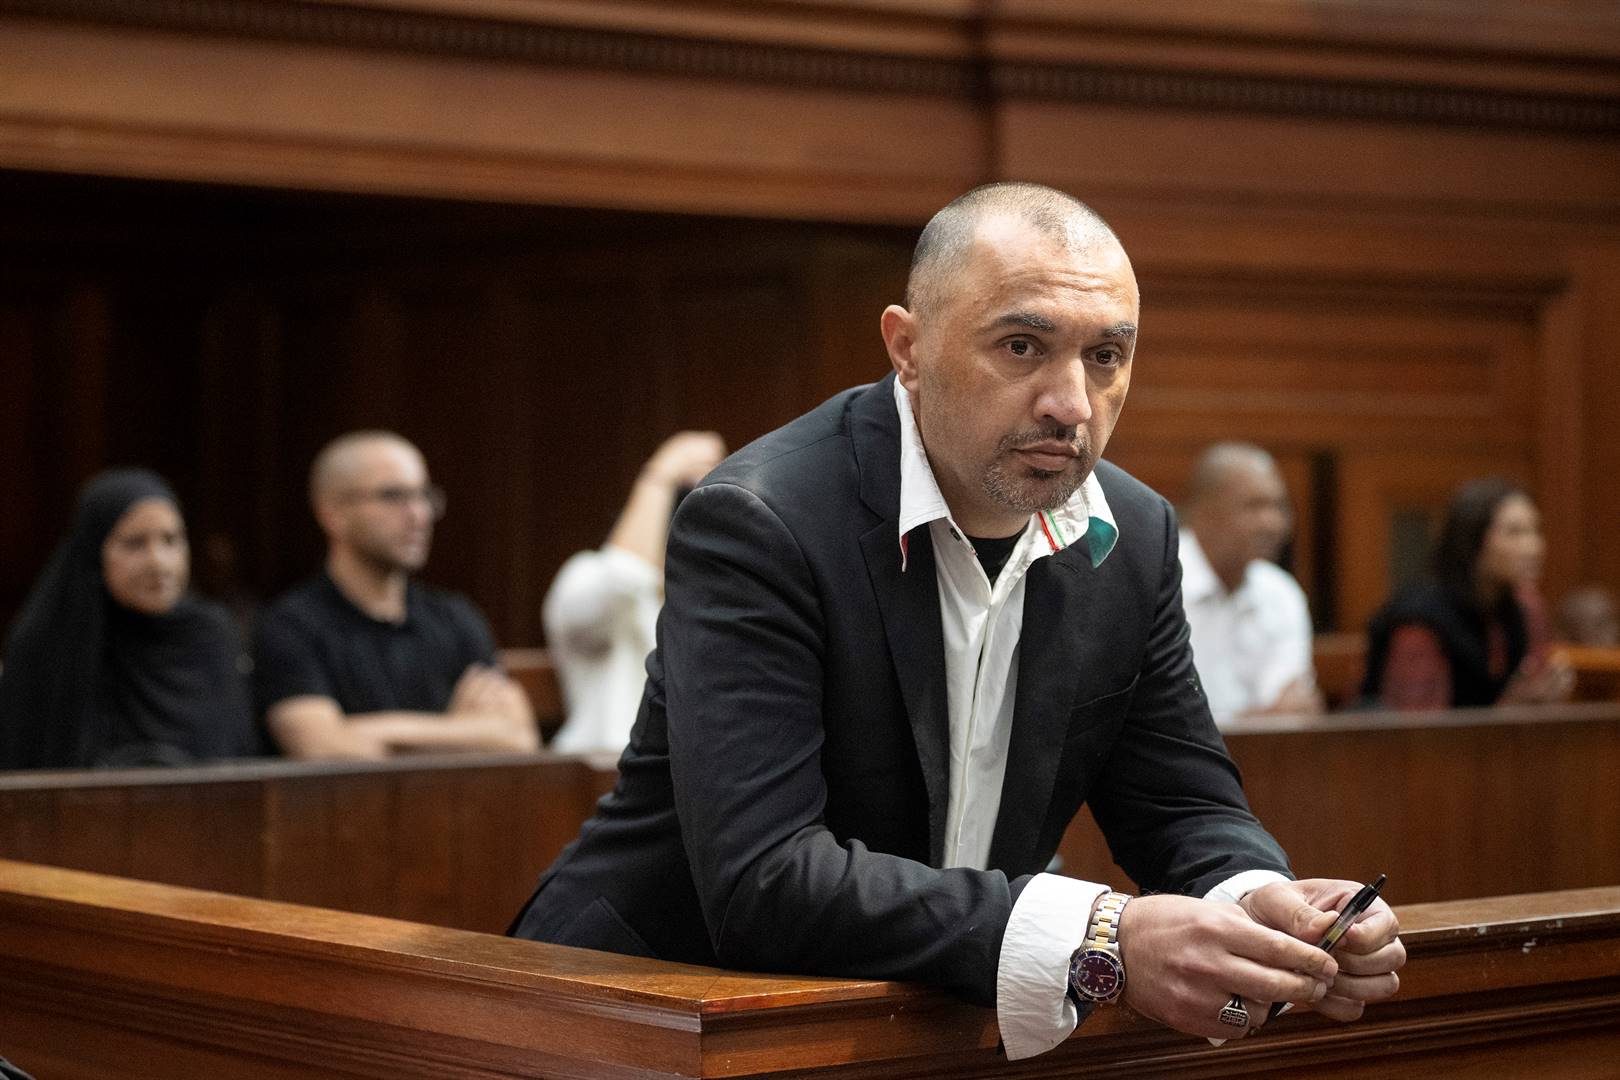 News24 | Modack's lawyer rubbishes claim that R3m was offered for murder of lawyer William Booth